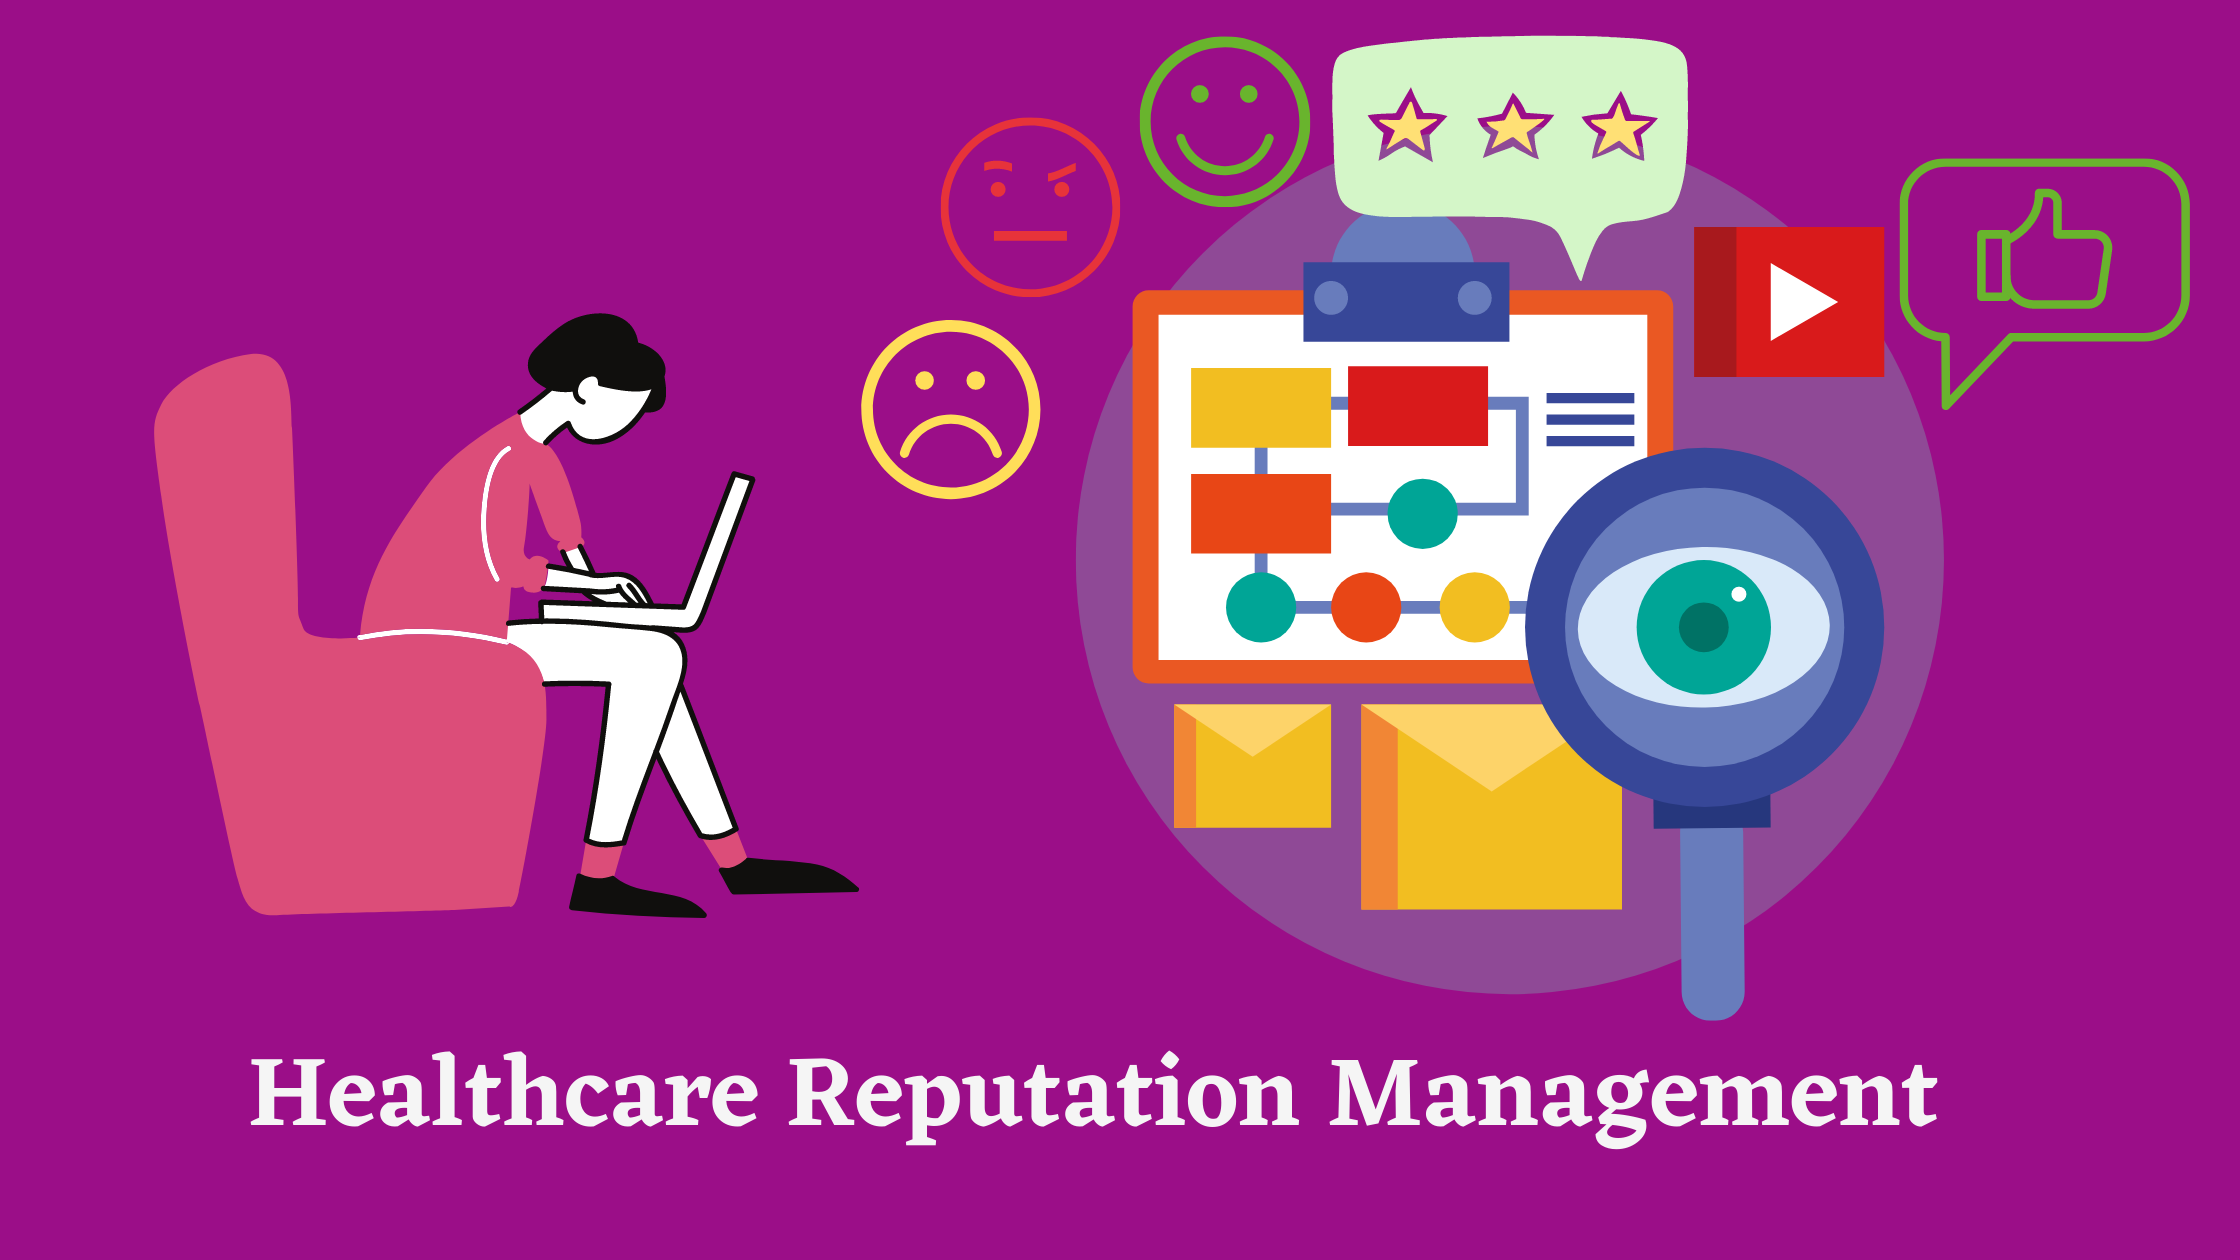 How to Use Text Analysis for Healthcare Reputation Management?